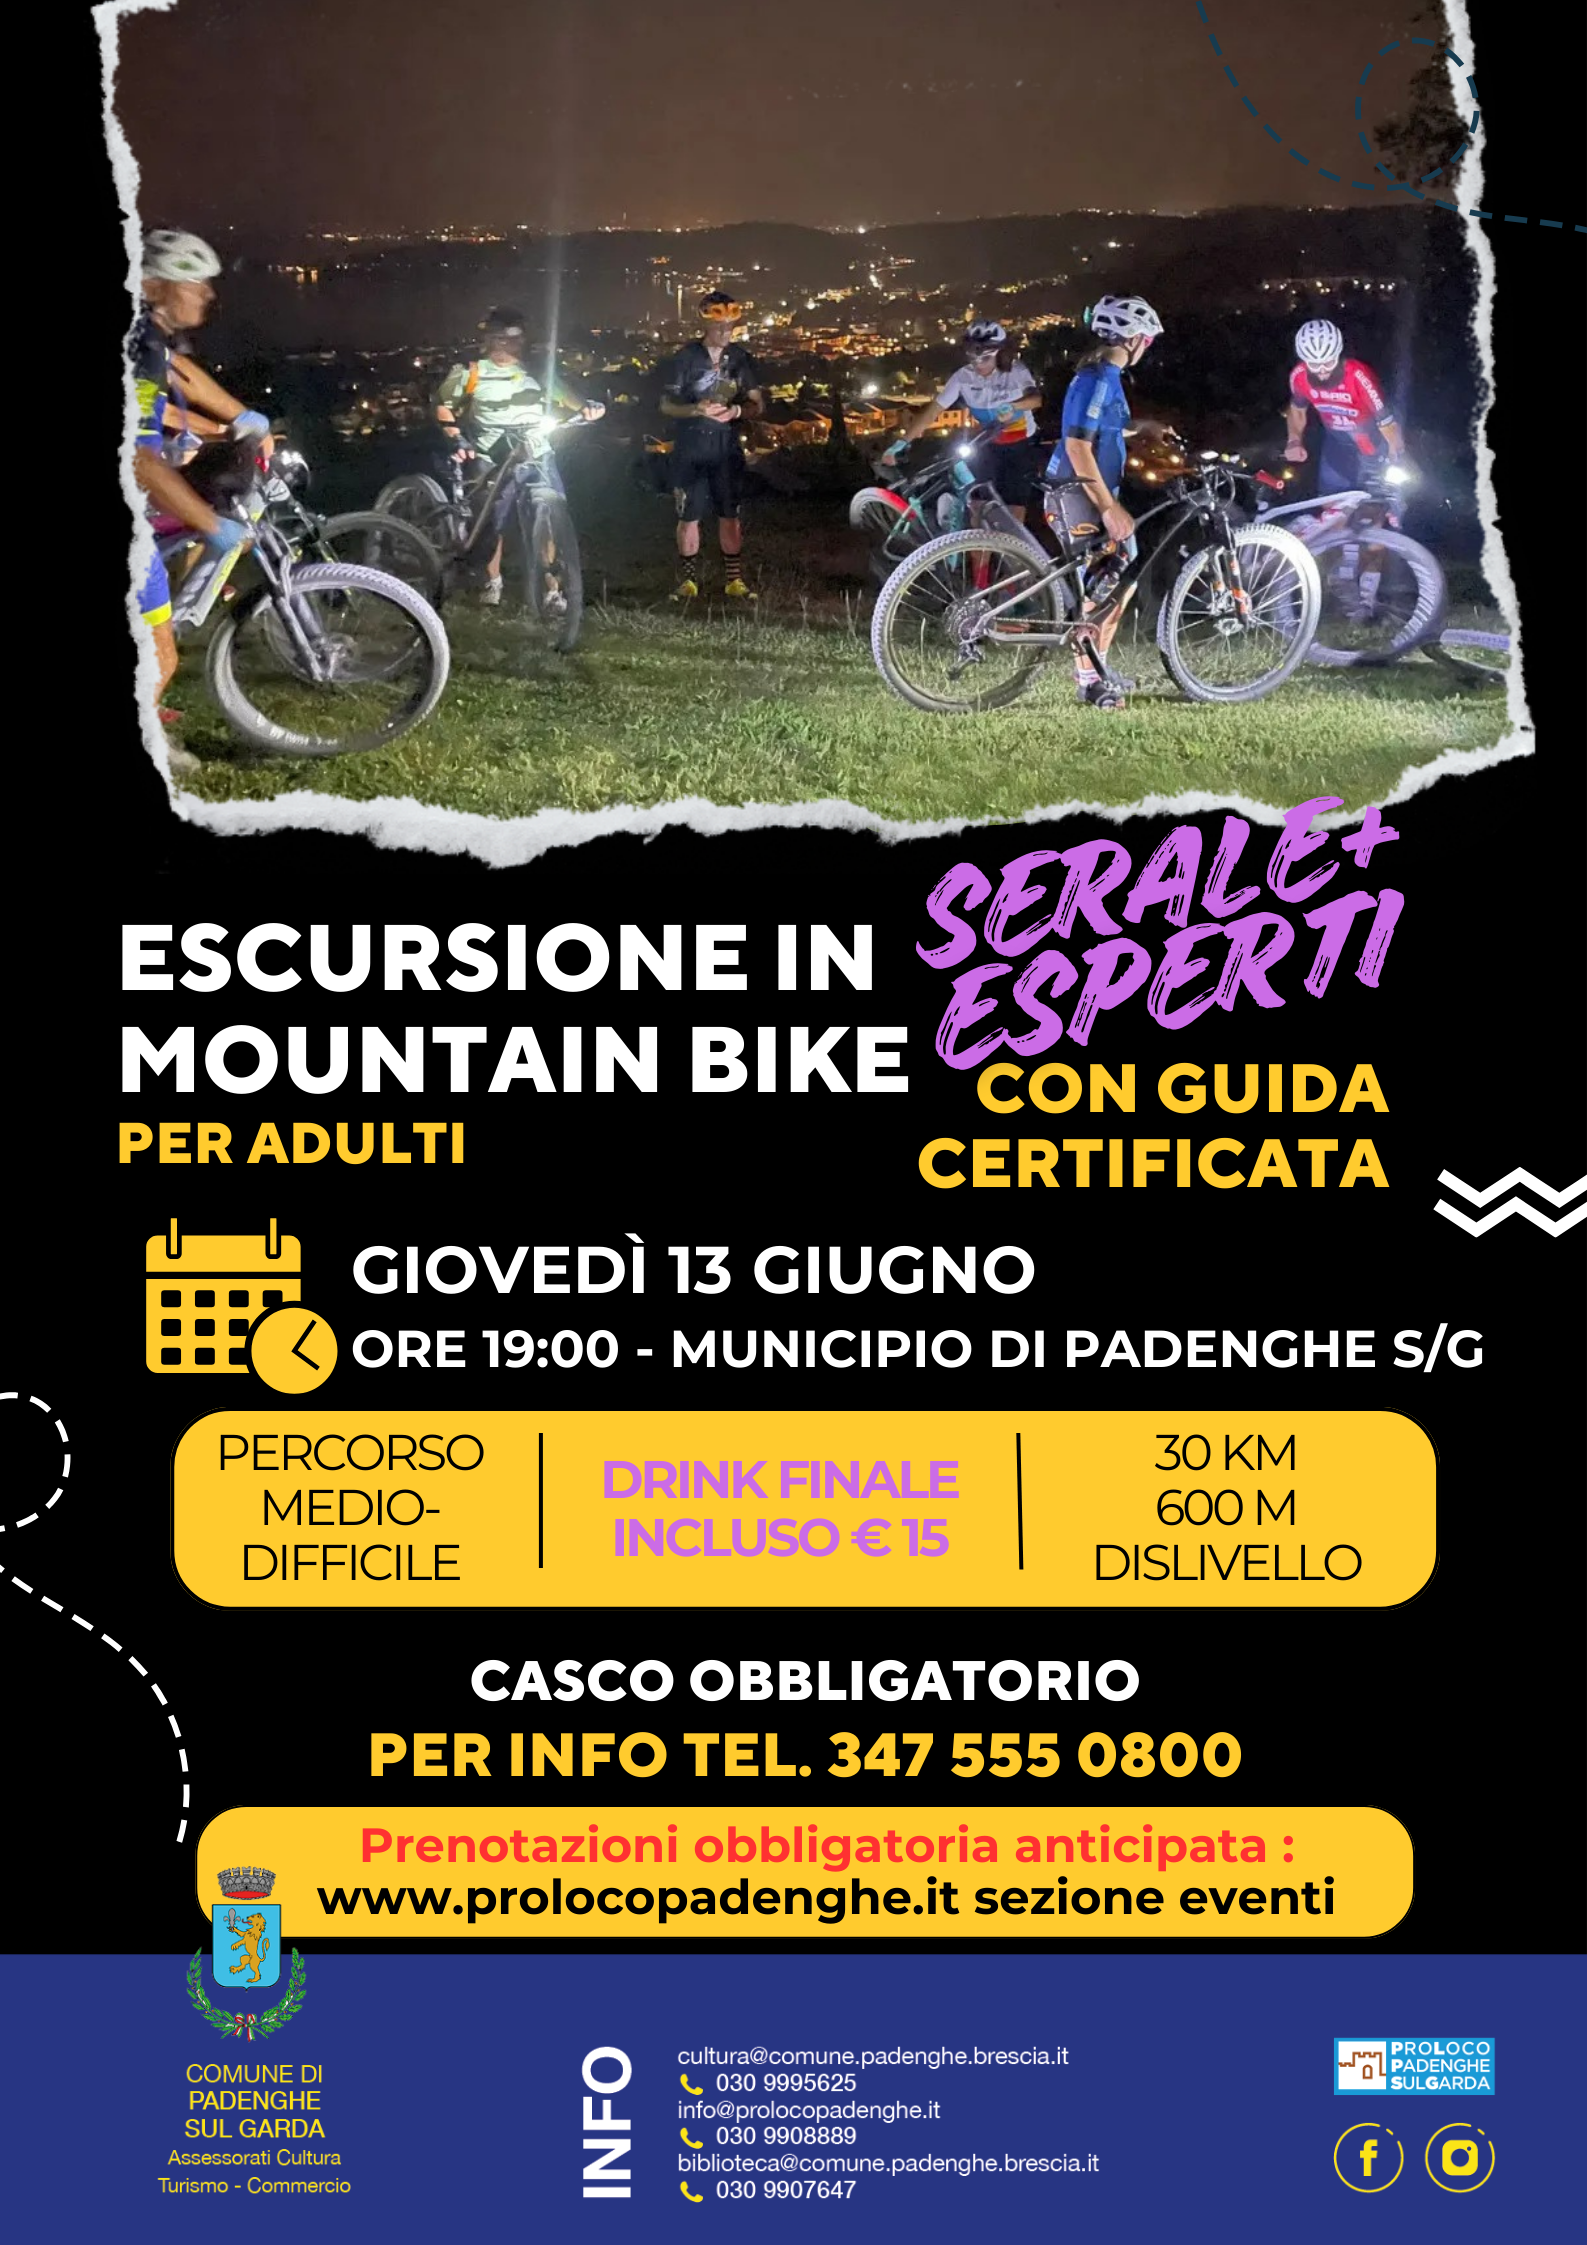 EVENING MOUNTAIN BIKE EXCURSION FOR EXPERTS 13th JUNE